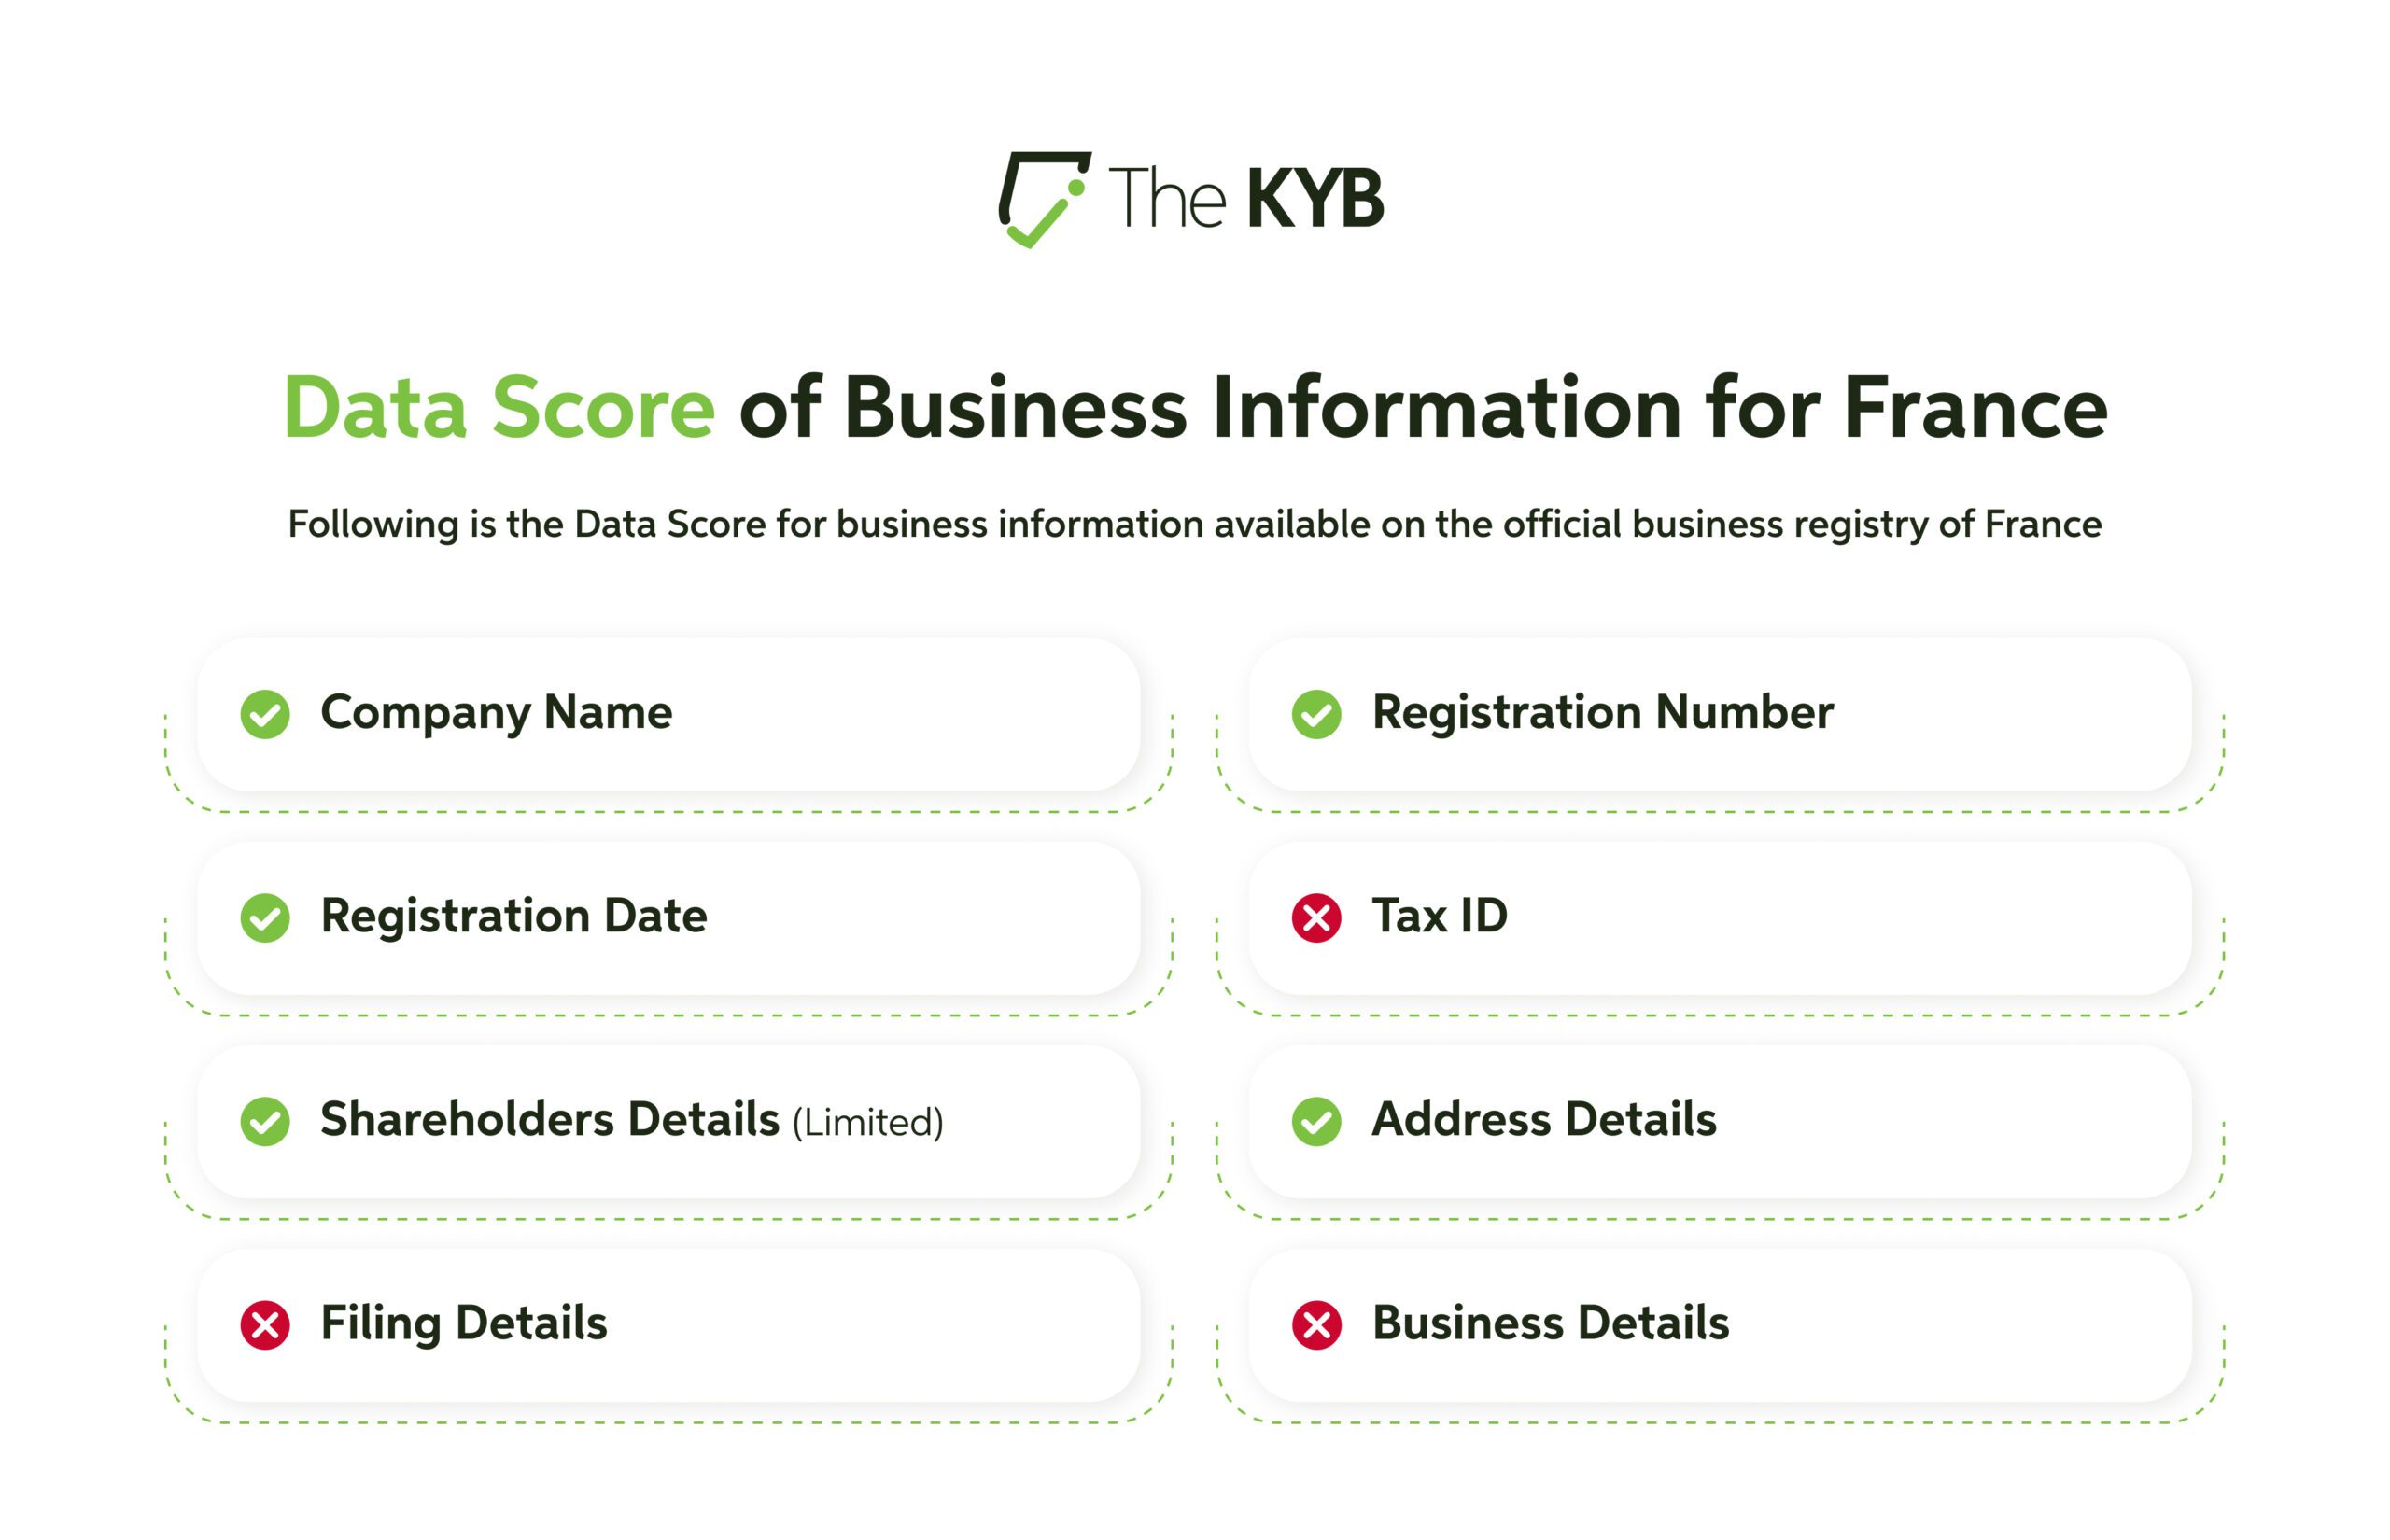 Data Score of Business Information in France